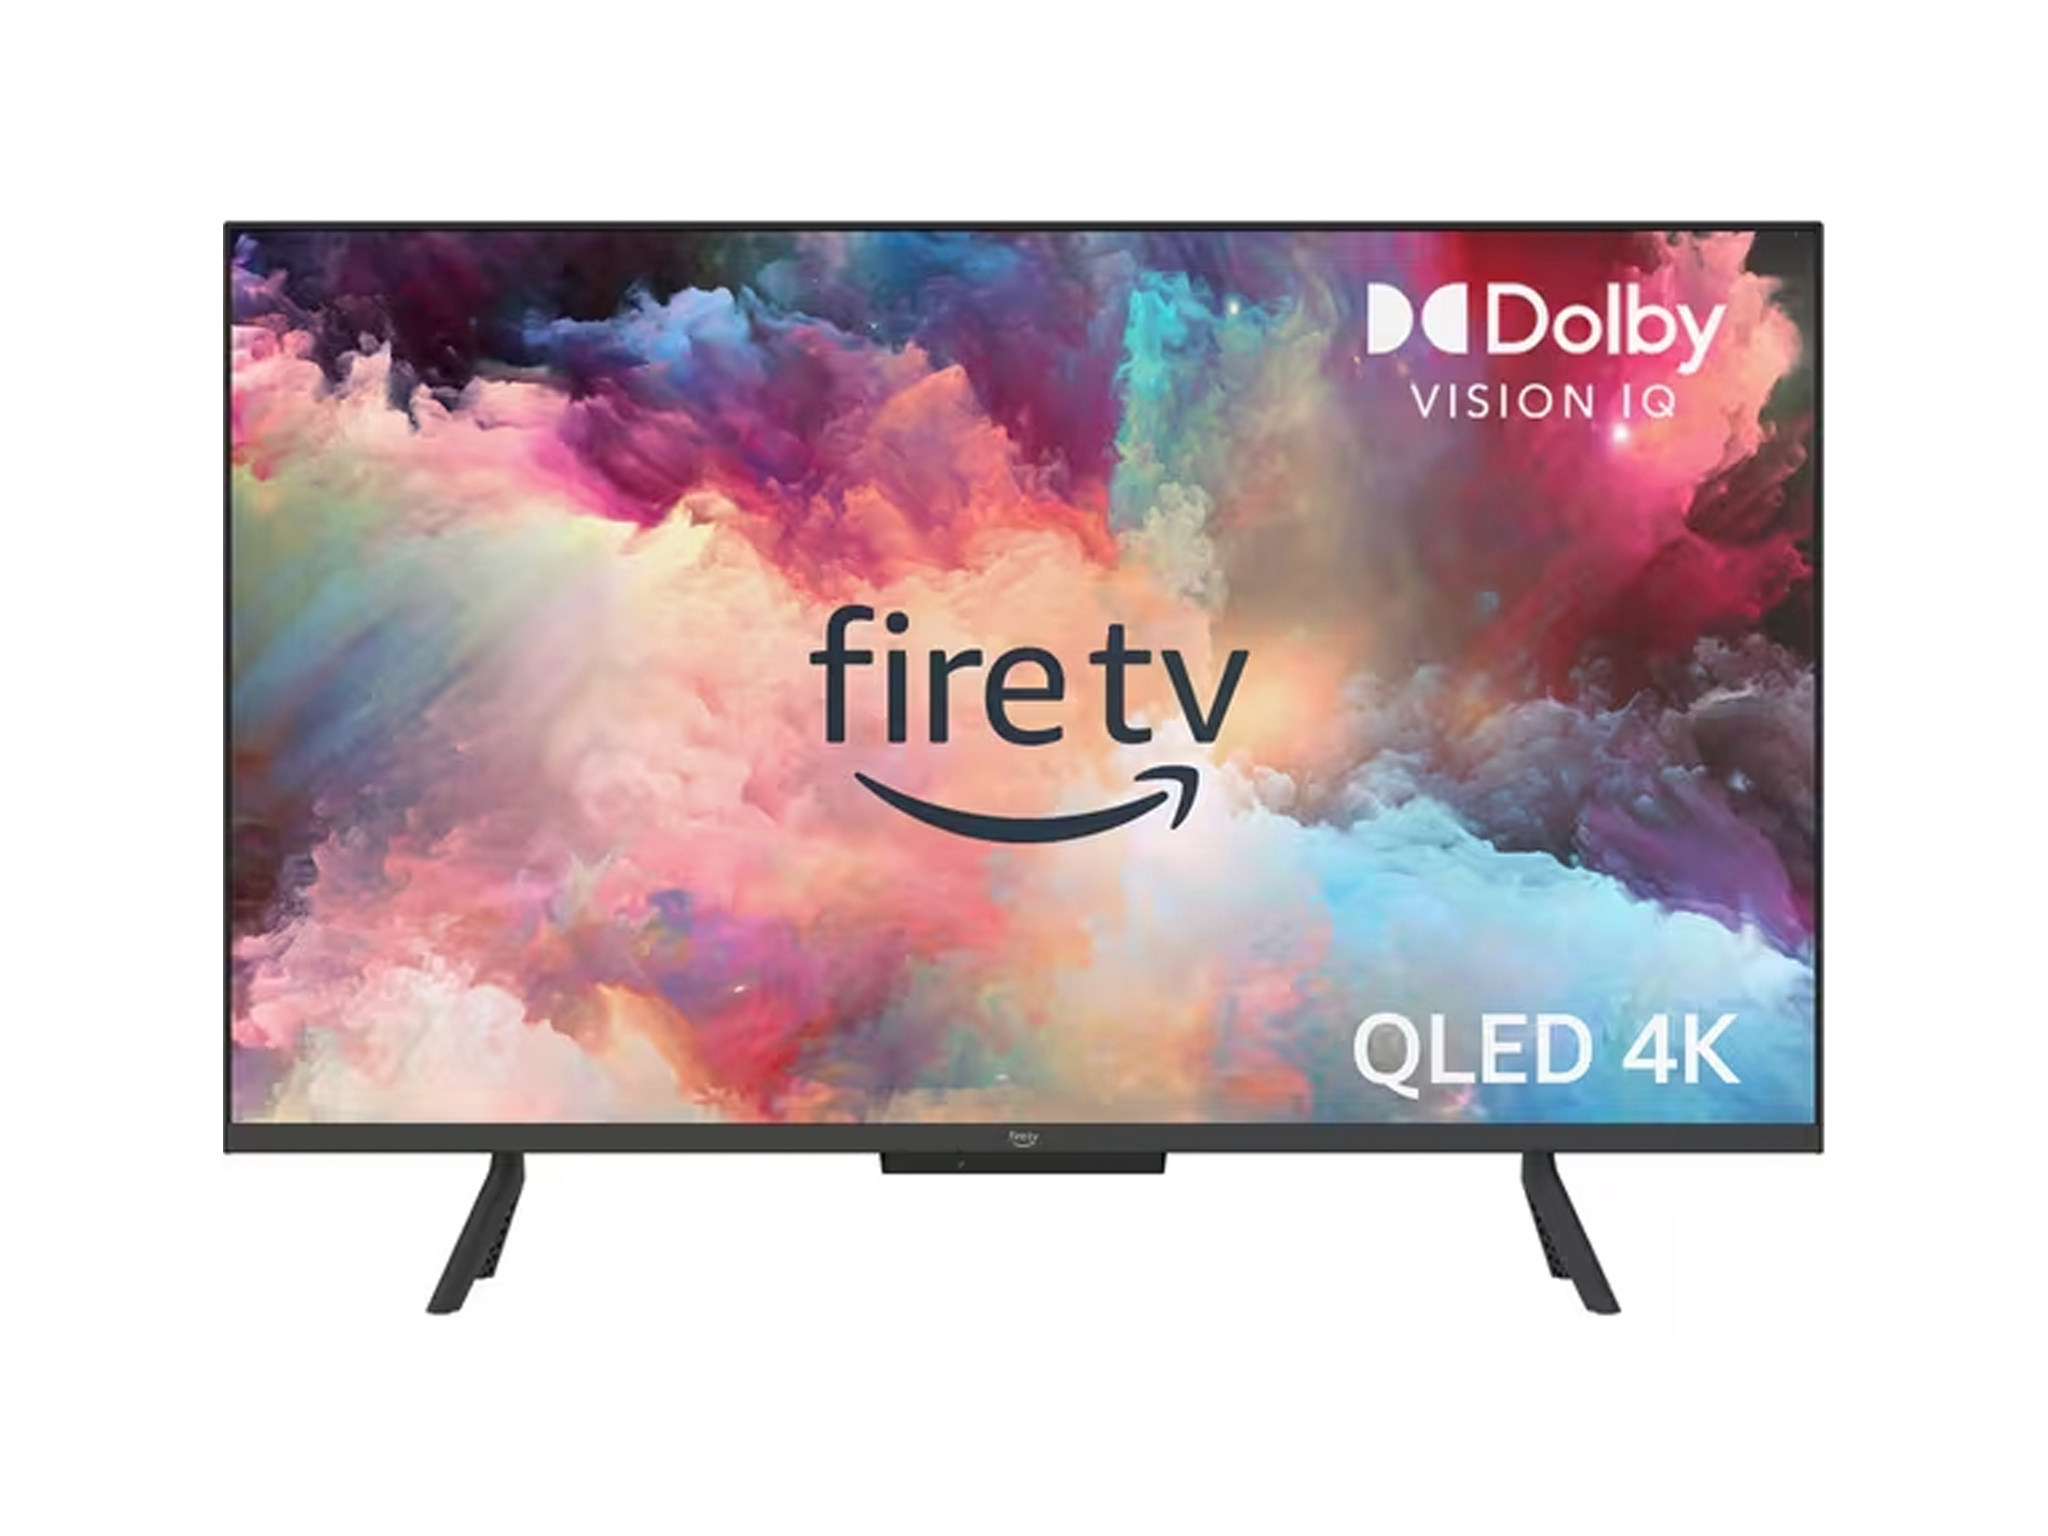 indybest, amazon deals, discounts, tech, how to, amazon, this 50-inch amazon fire 4k tv has a massive £200 off – here’s how to get your hands on one